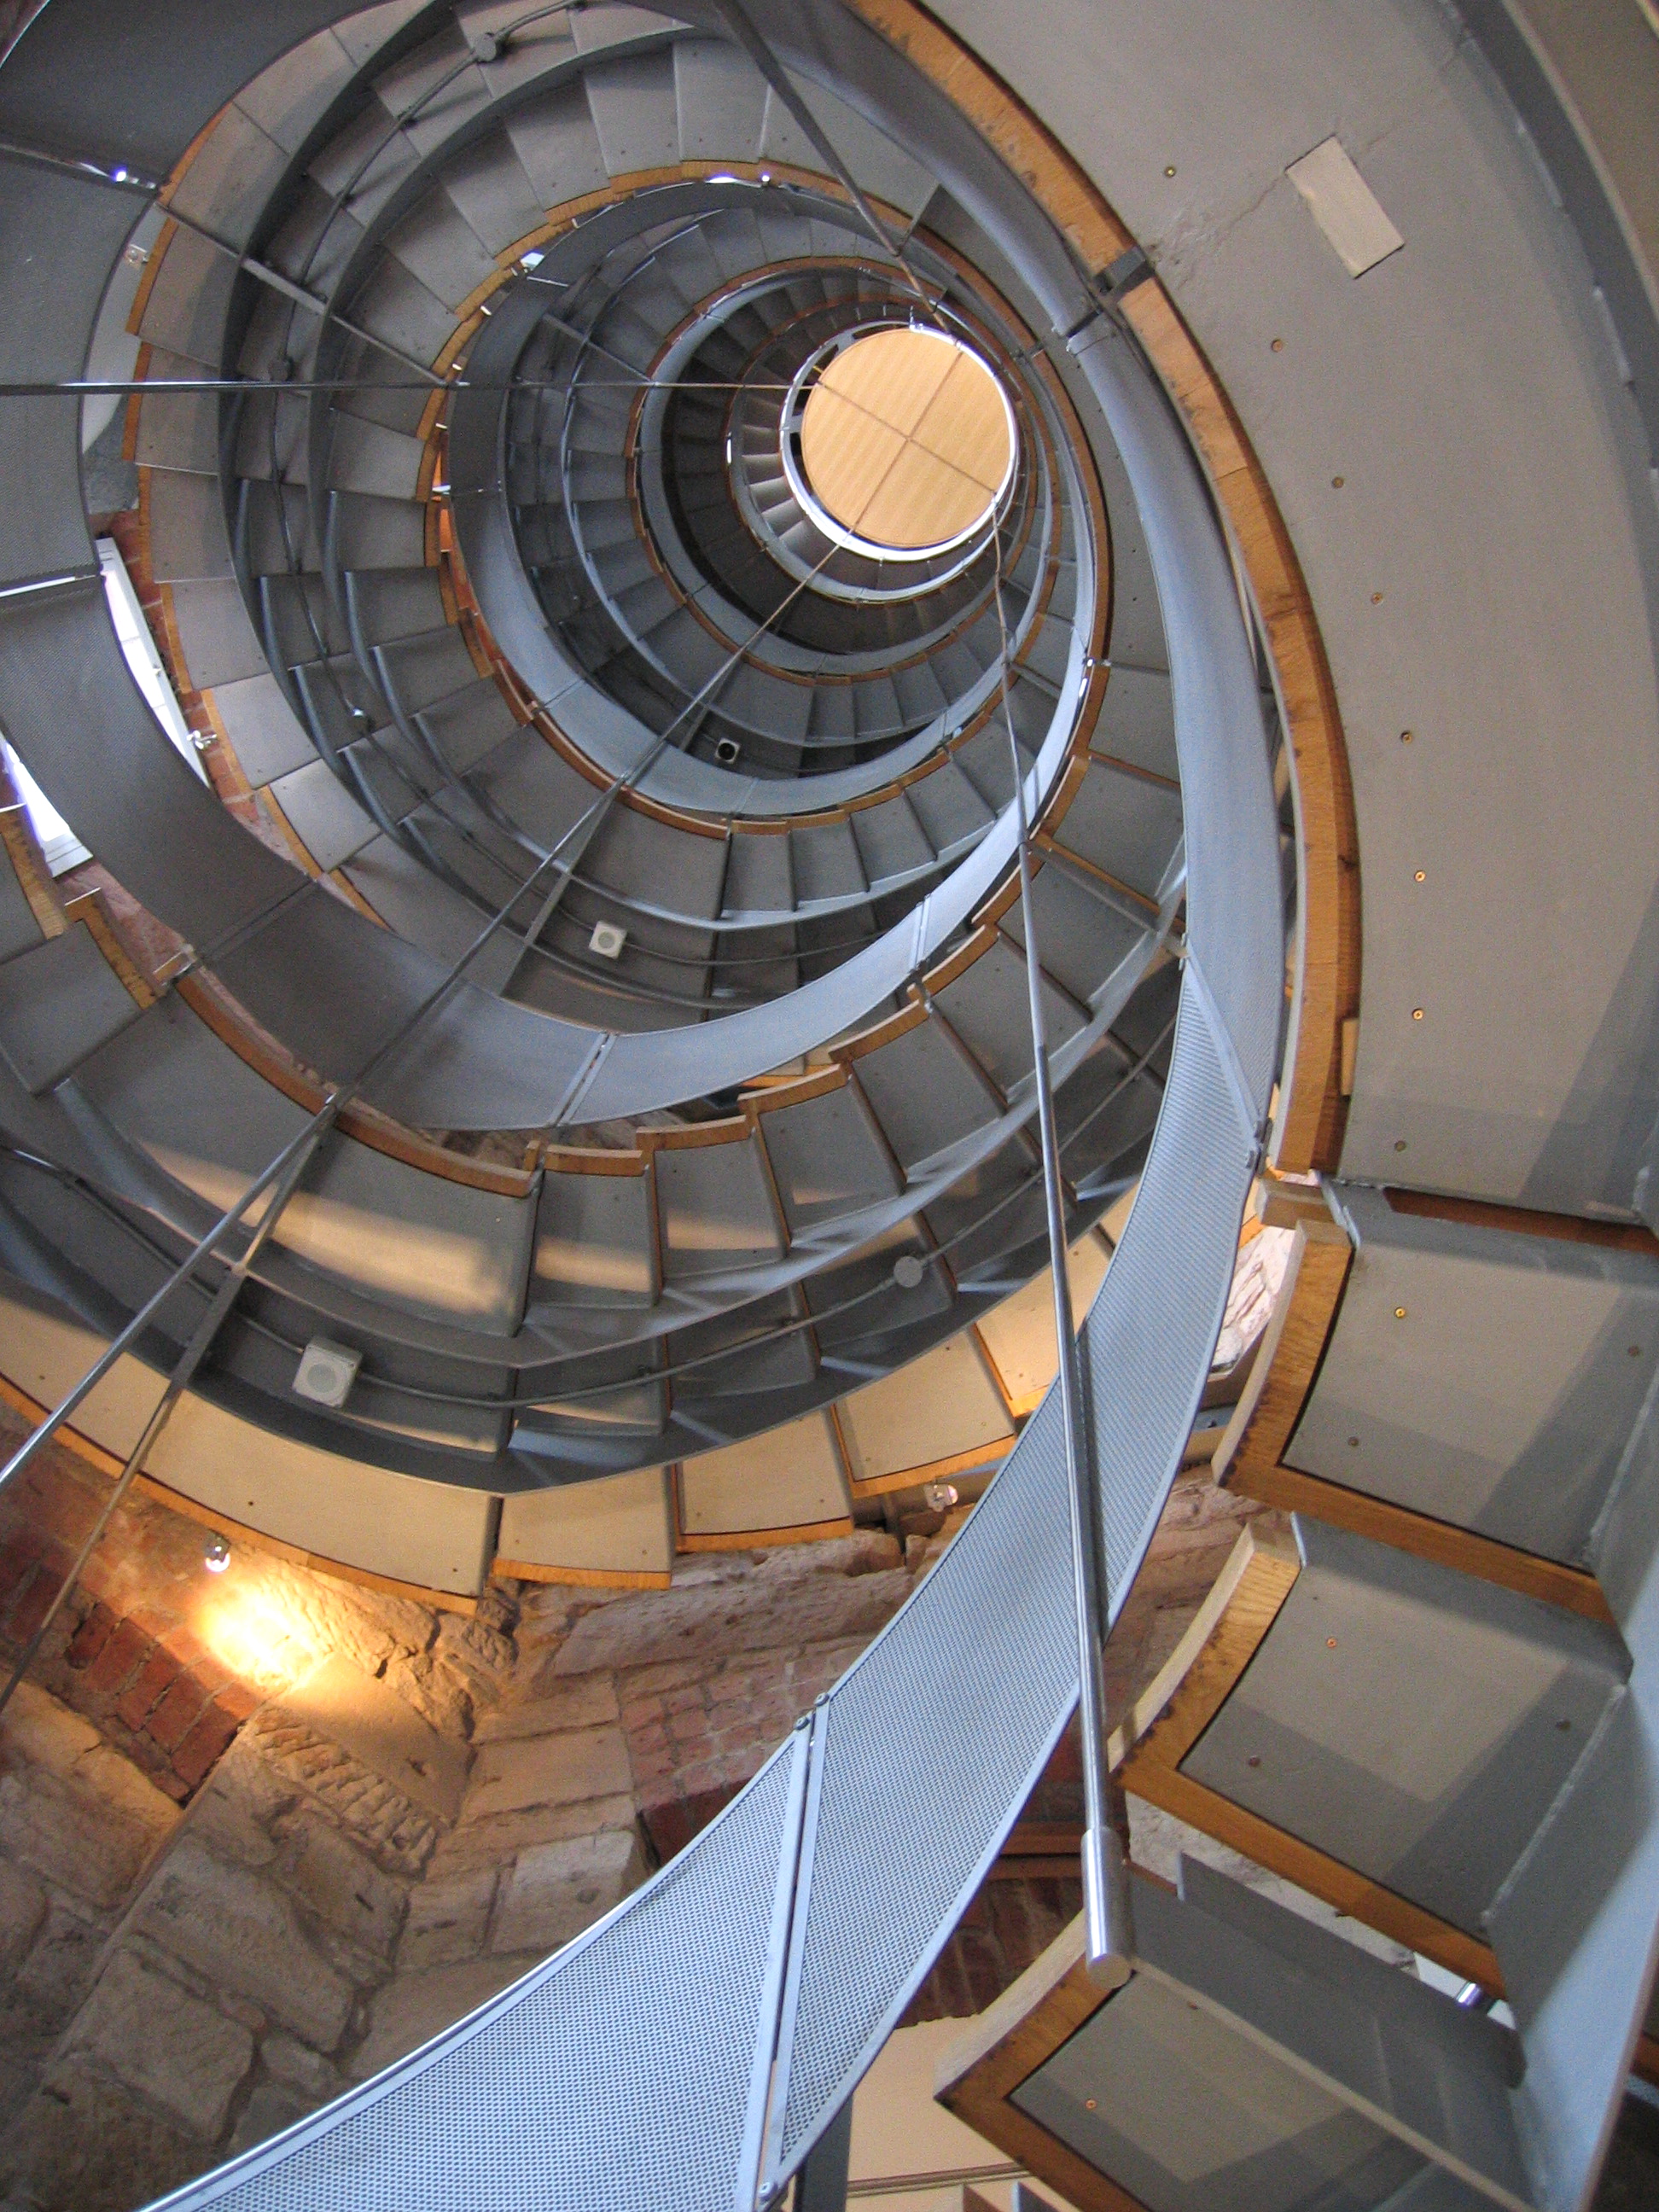 File:The Lighthouse Staircase.jpg - Wikimedia Commons